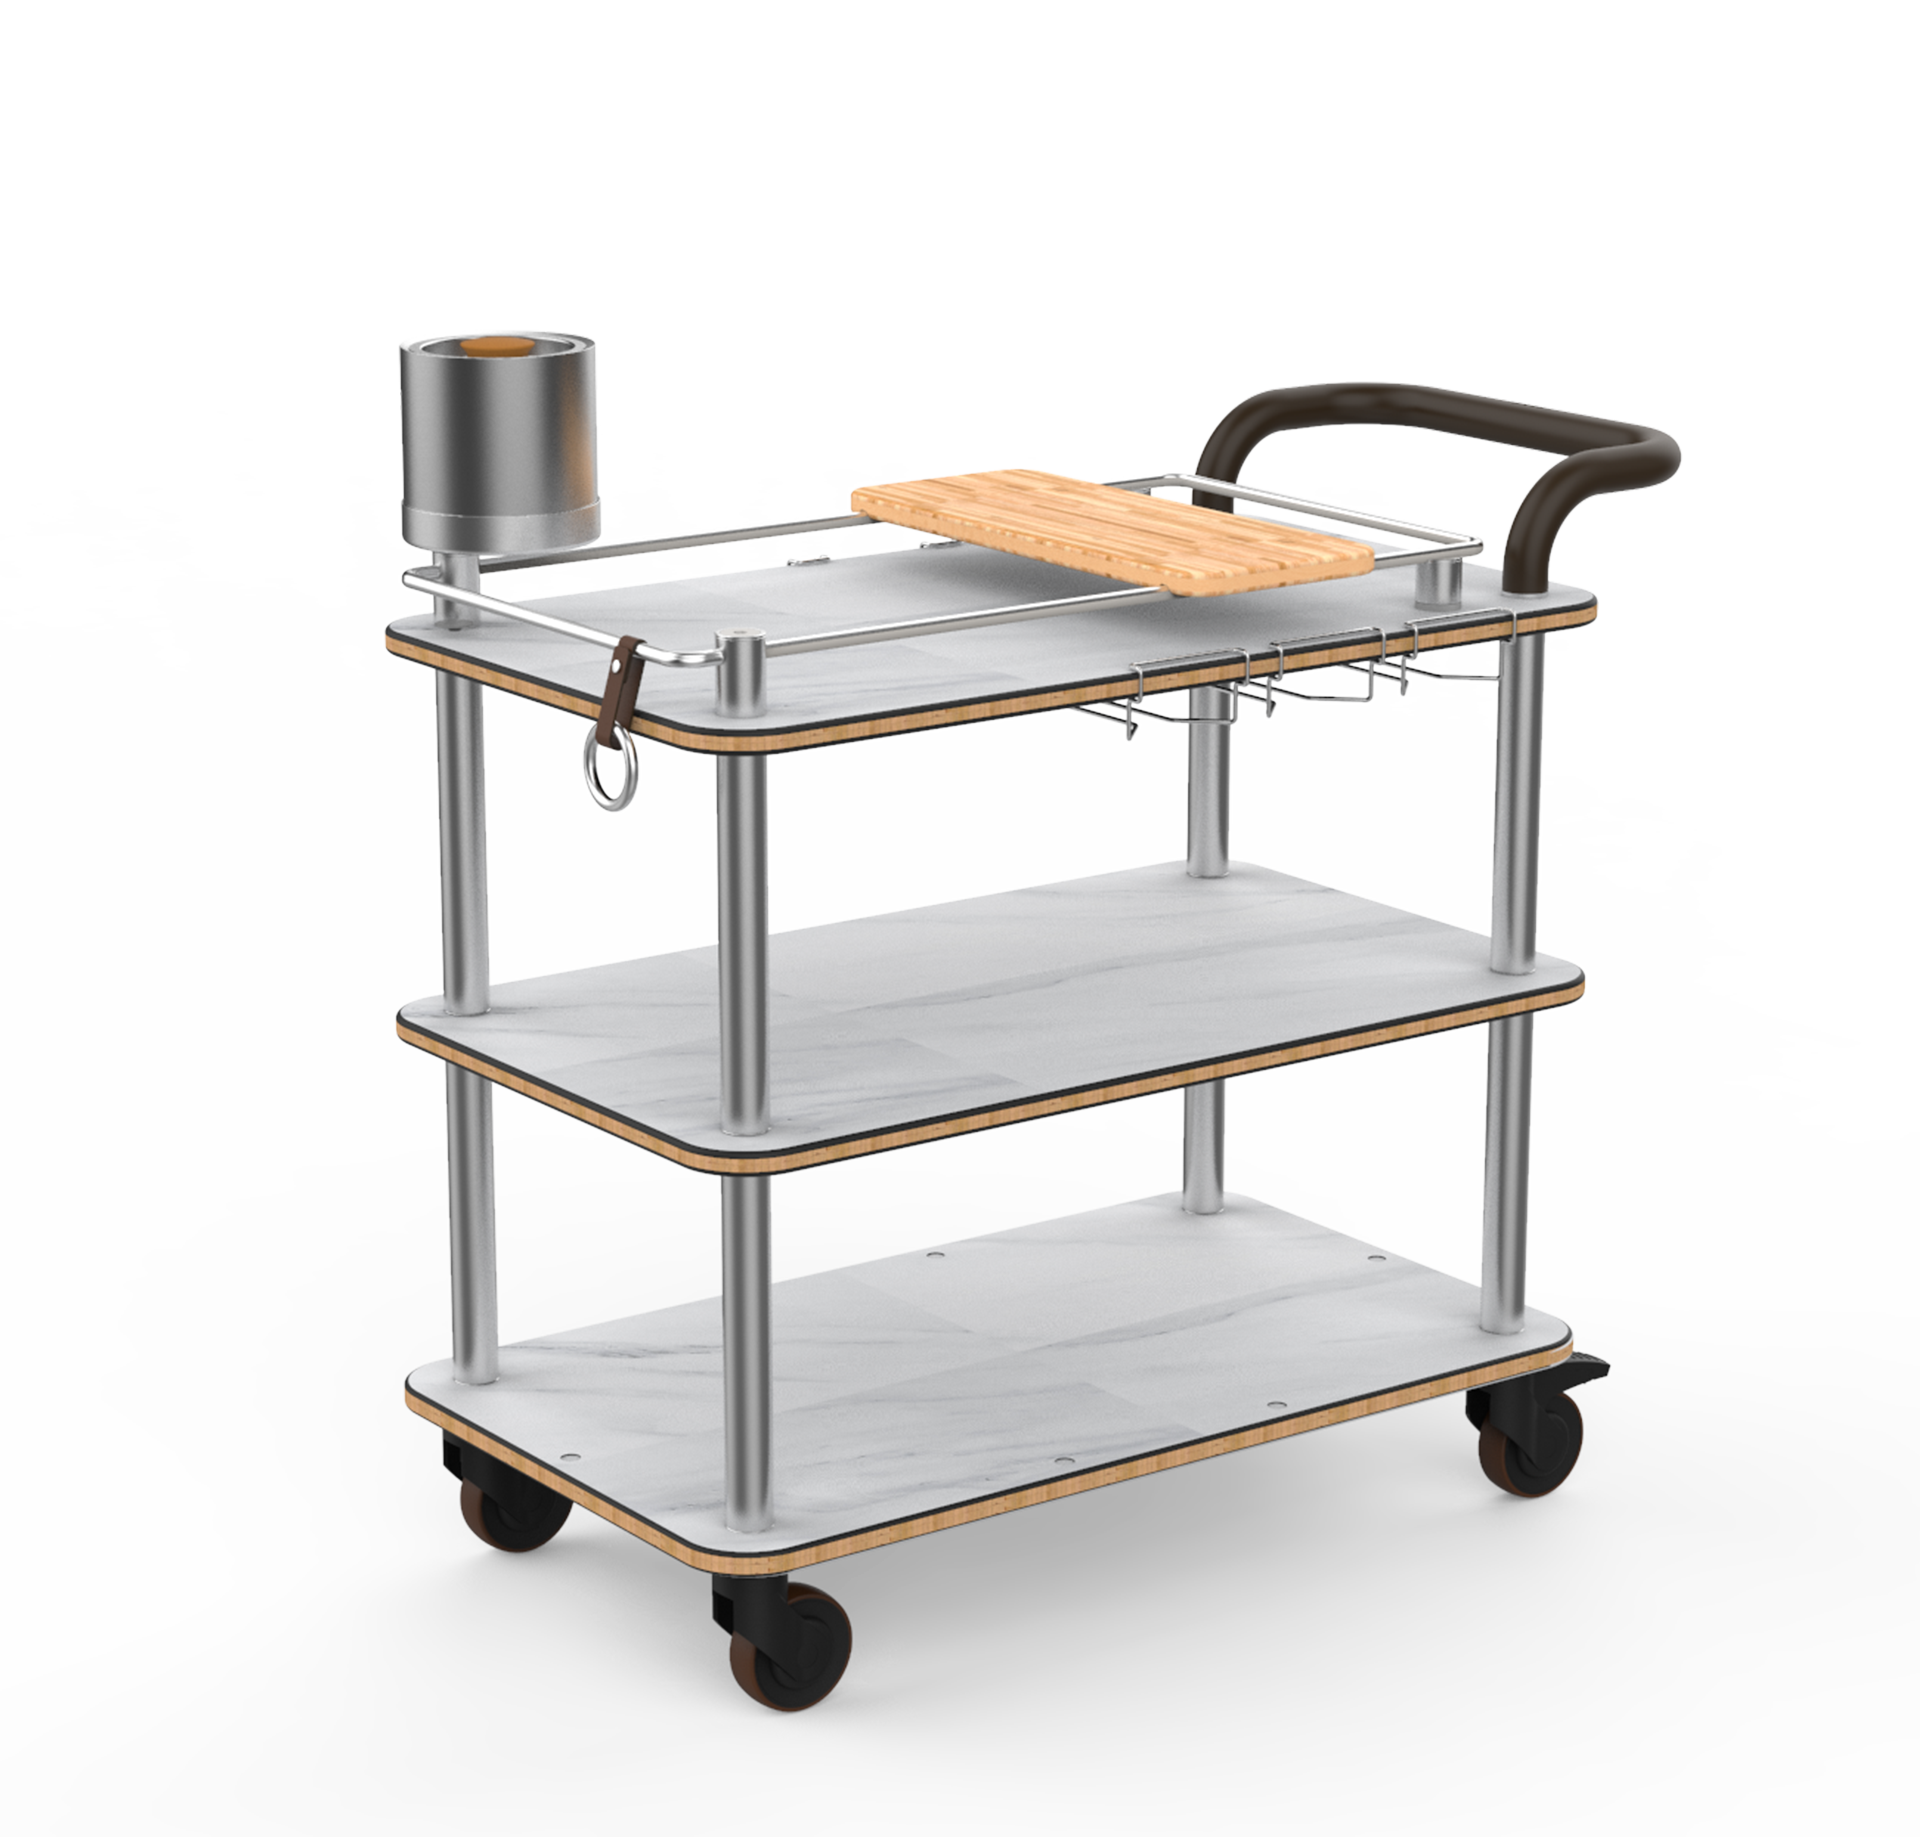 MIXOLOGY CART WITH LEATHER HANDLE